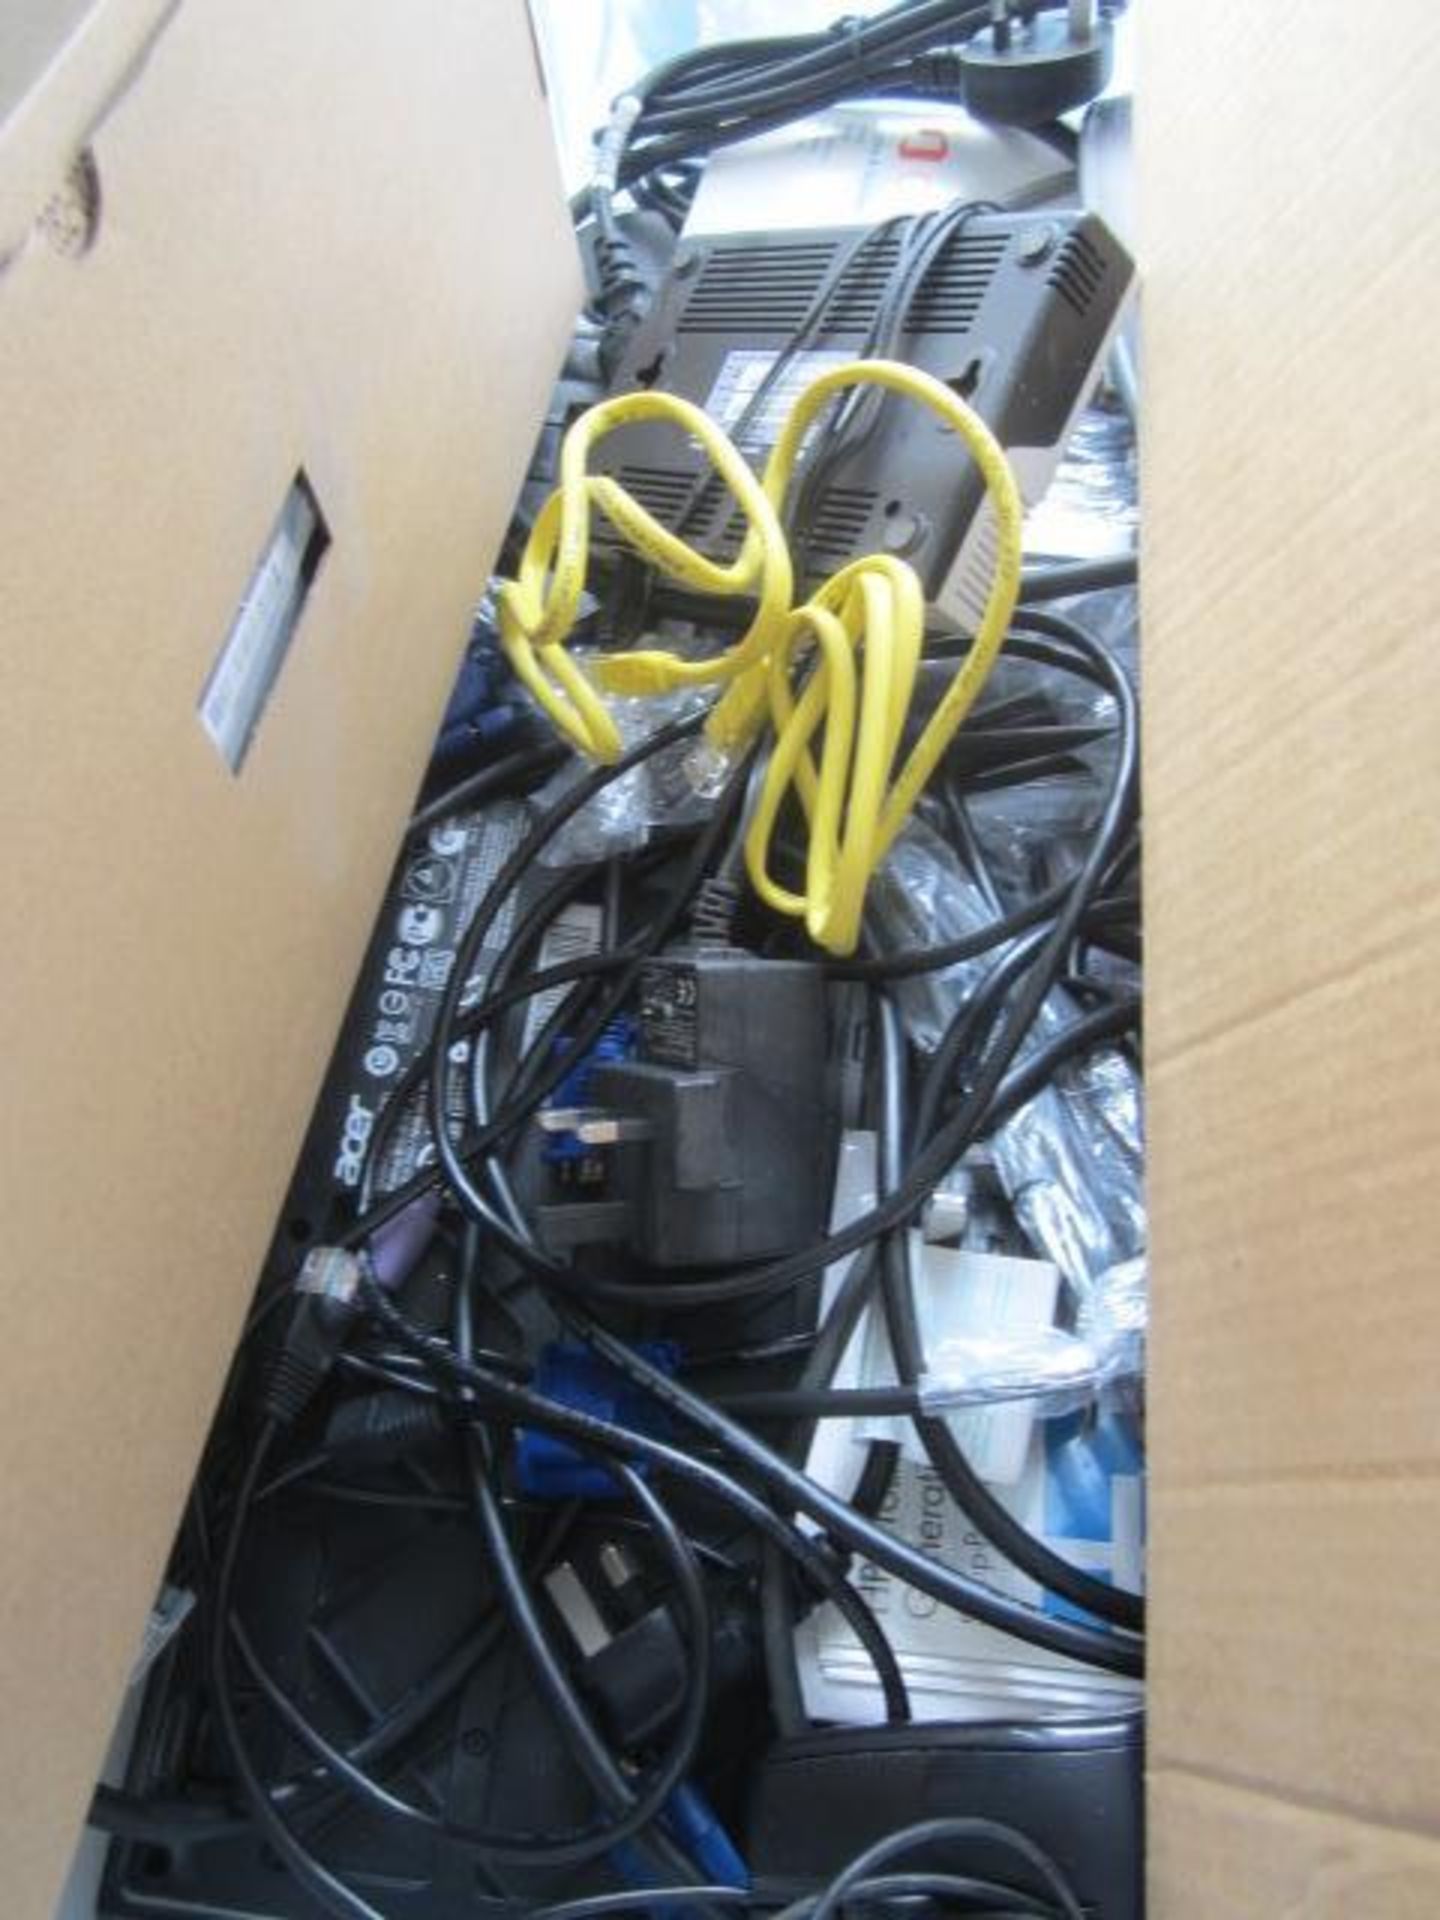 Quantity of various IT including keyboards, mice, computer cables etc. - Image 4 of 4